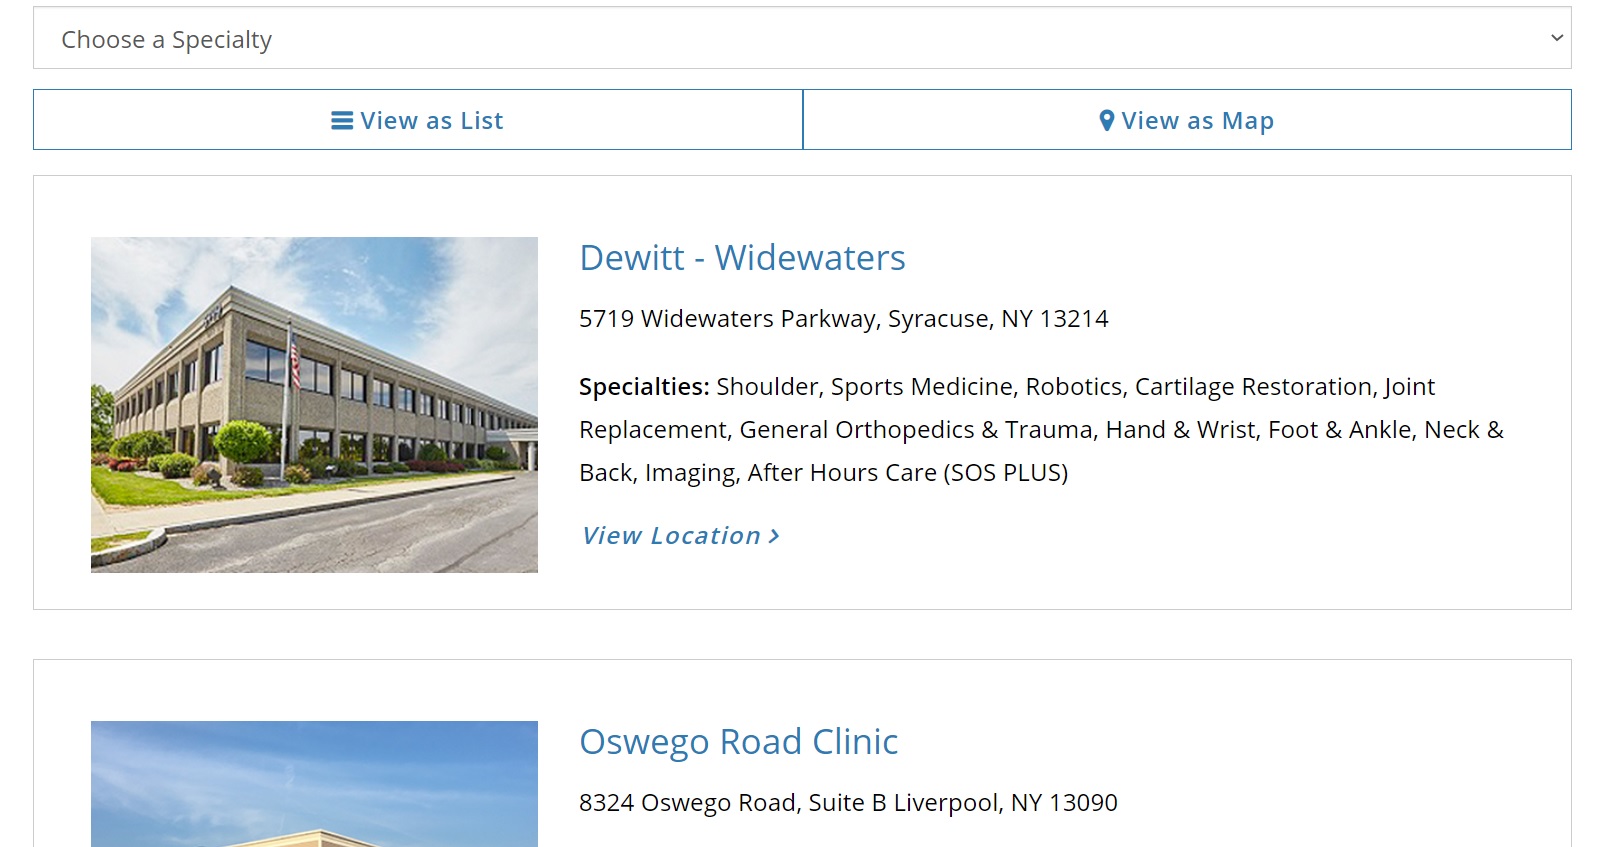 medical website design and development image of office location index with options to sort as a list view on a map or sort locations by specialty